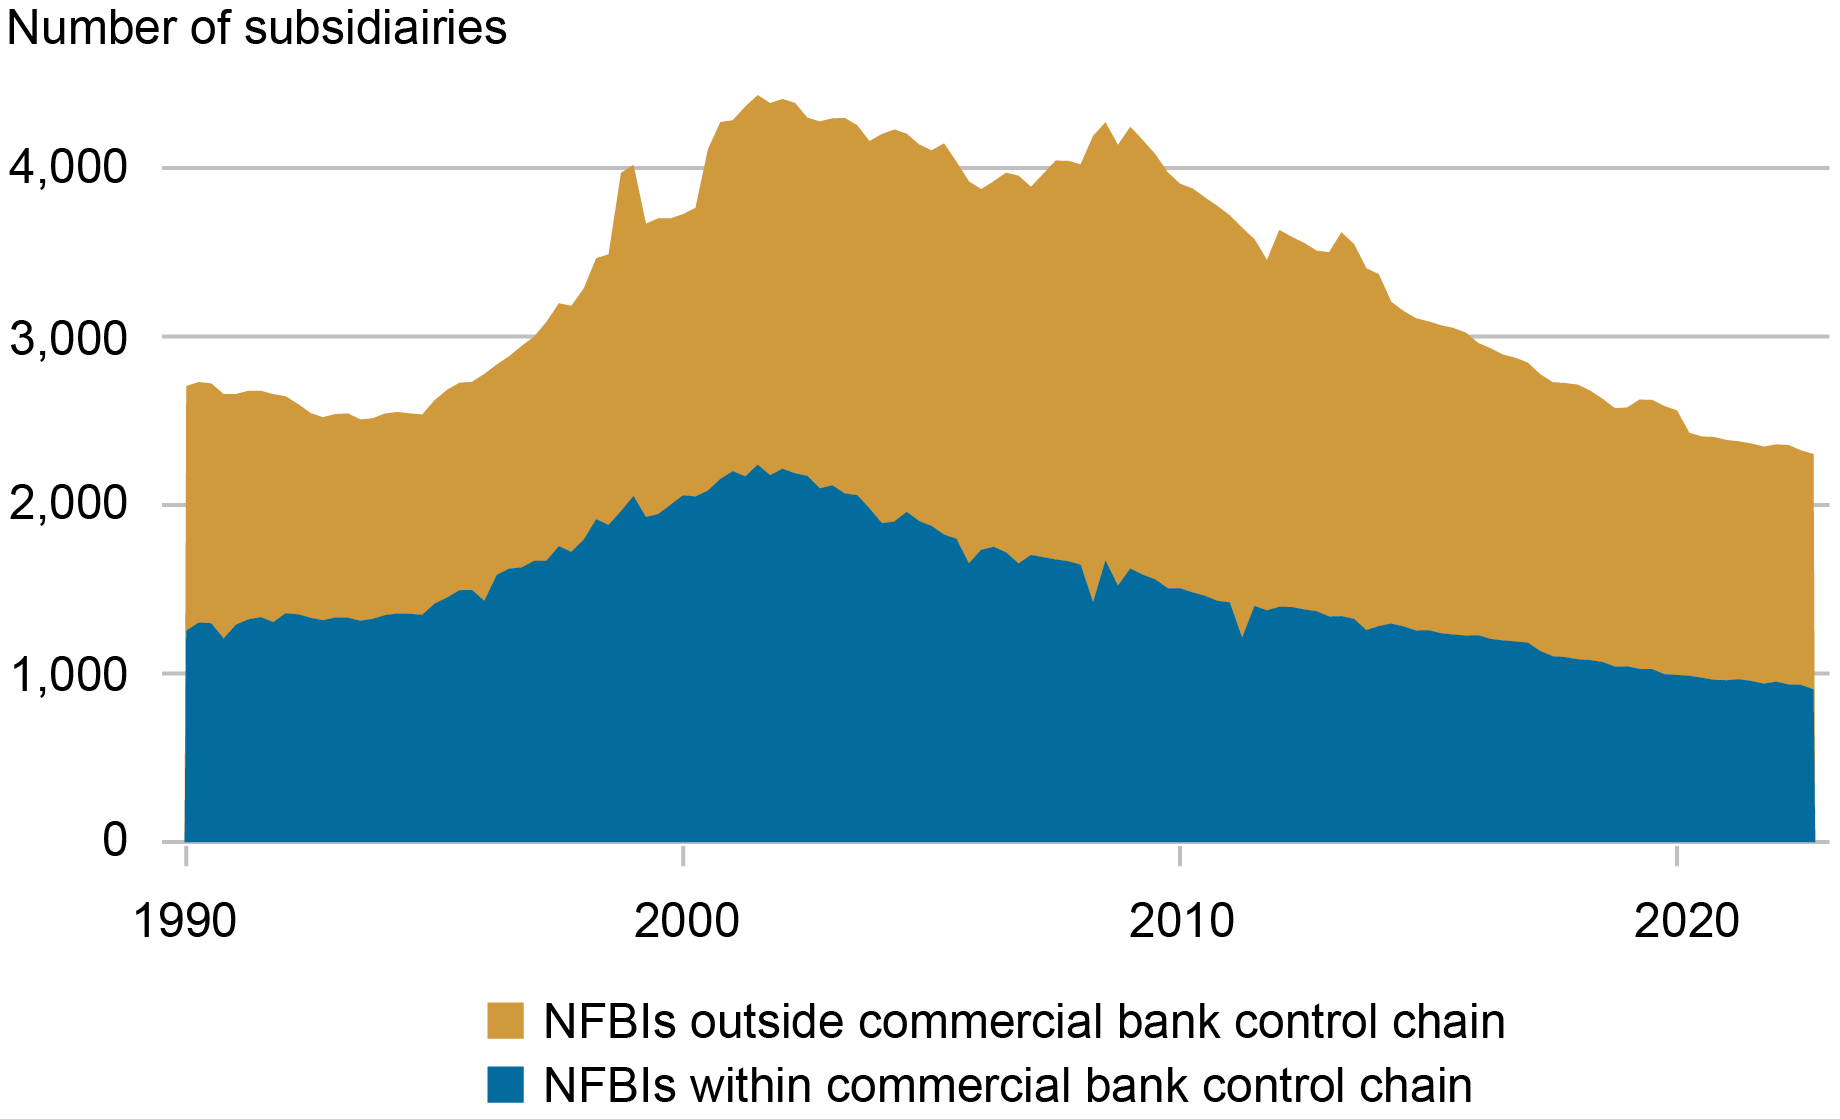 Liberty Street Economics area chart showing the number of nonbank financial institution subsidiaries within large bank holding companies that are owned or not owned by a commercial bank. 